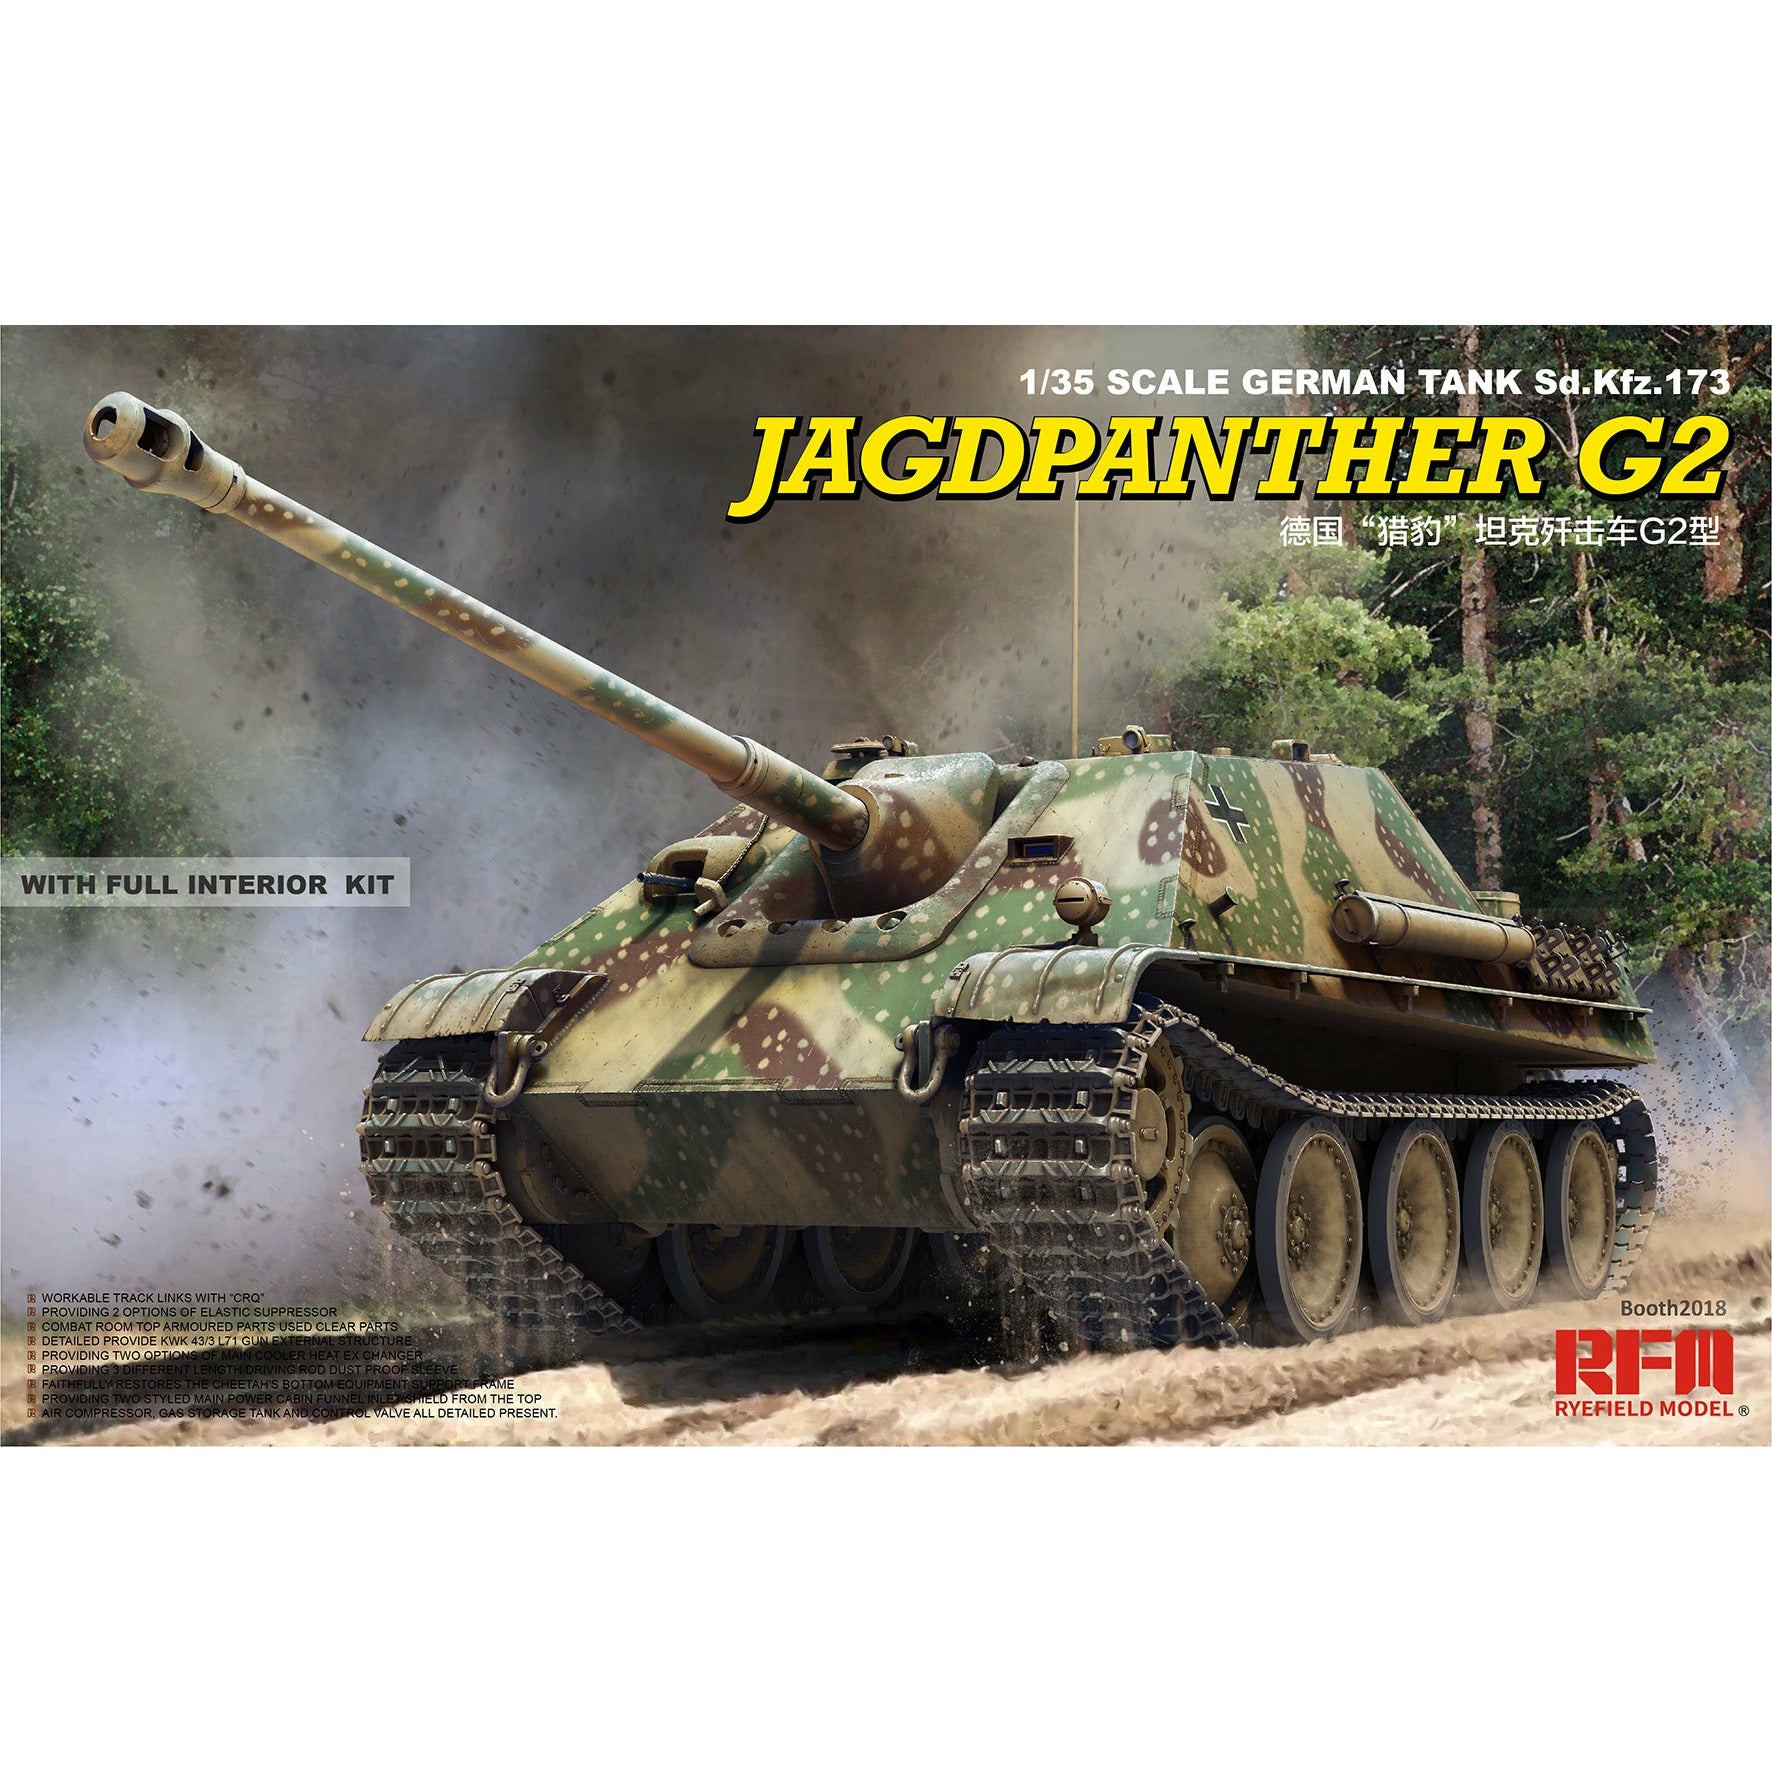 Jagdpanther w/ Full Interior & Workable Tracks 1/35 #5022 by Ryefield Model